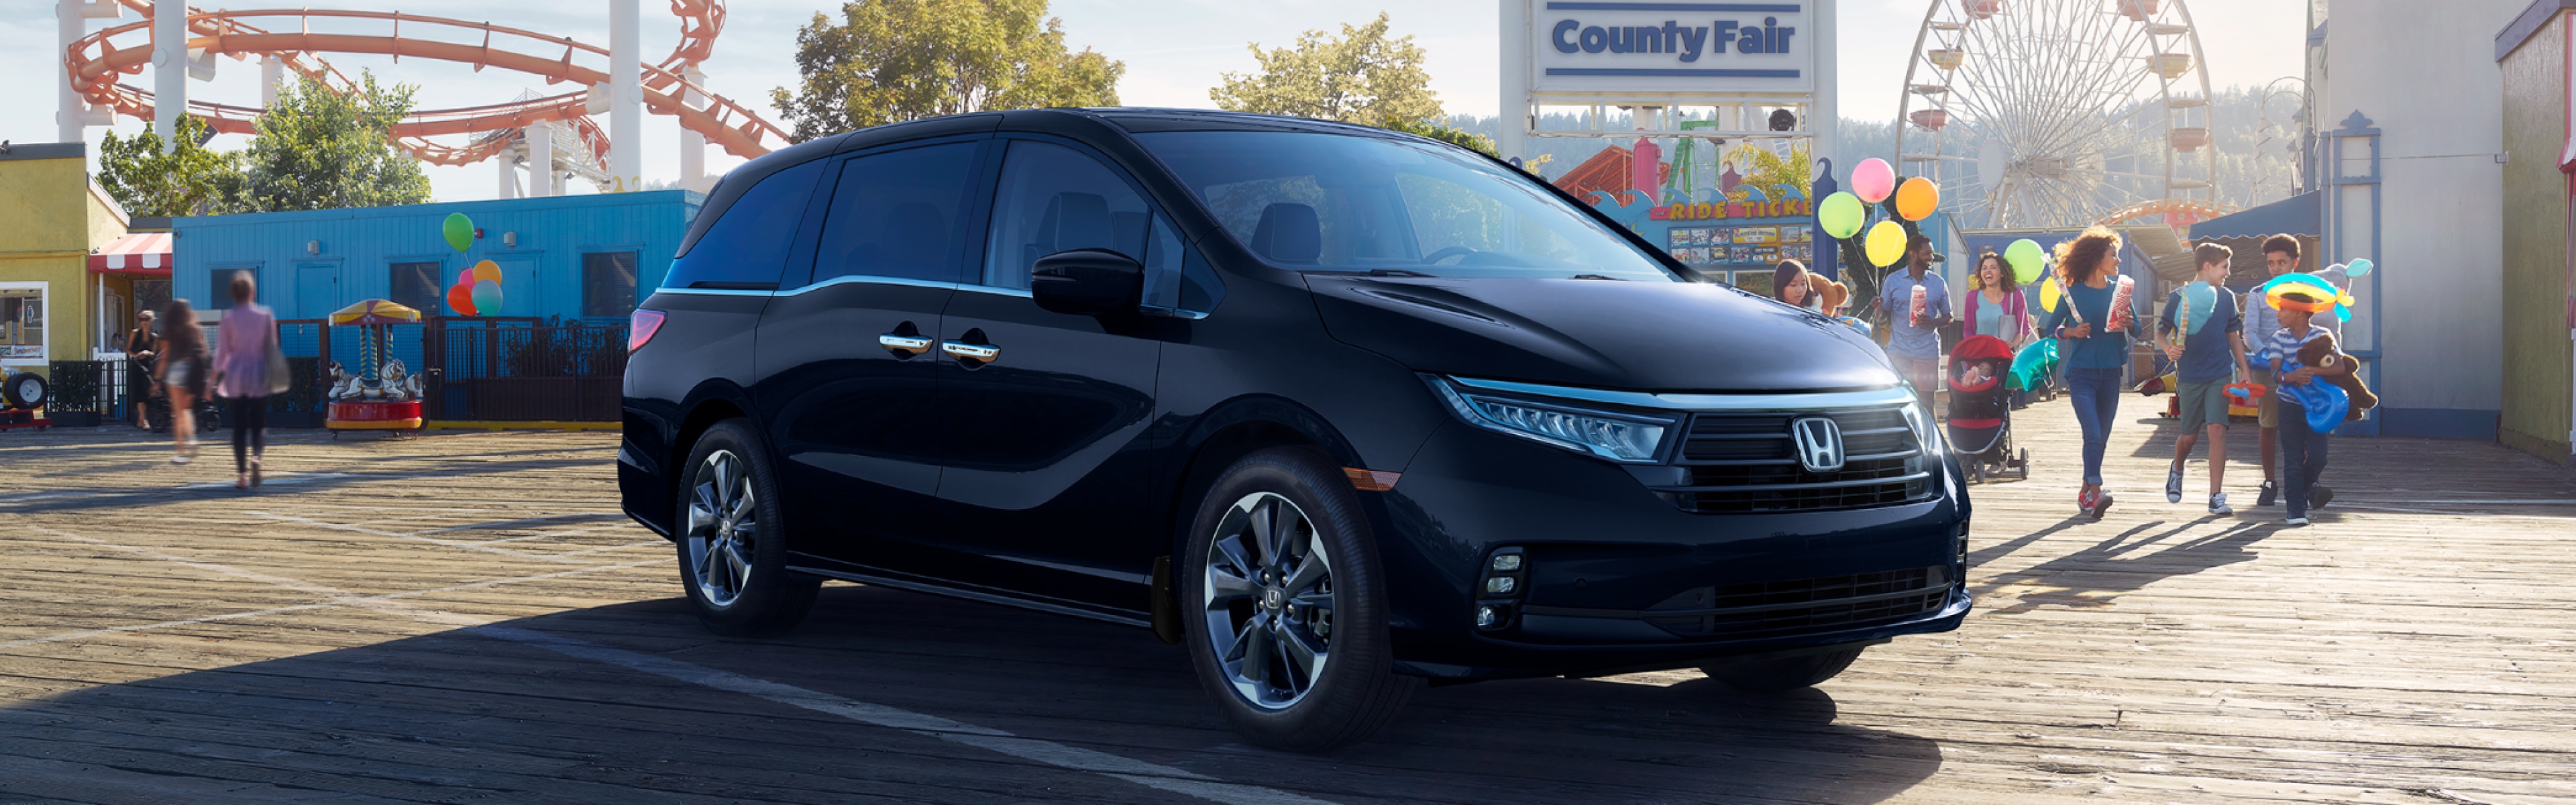 Image of the 2023 Honda Odyssey at an amusement park.